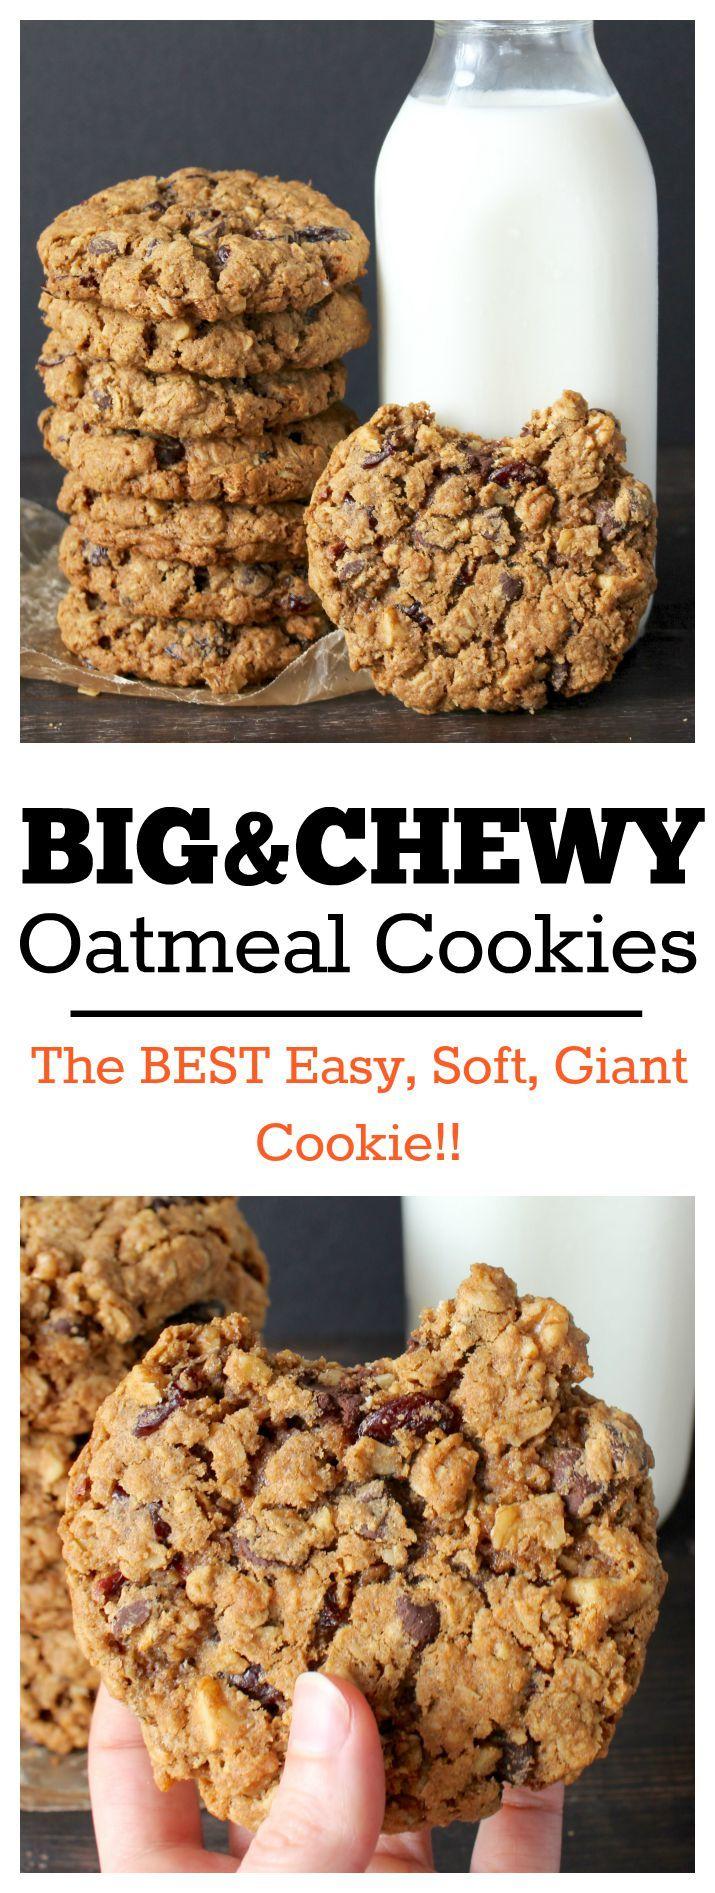 Hochzeit - Big And Chewy Oatmeal Cookies